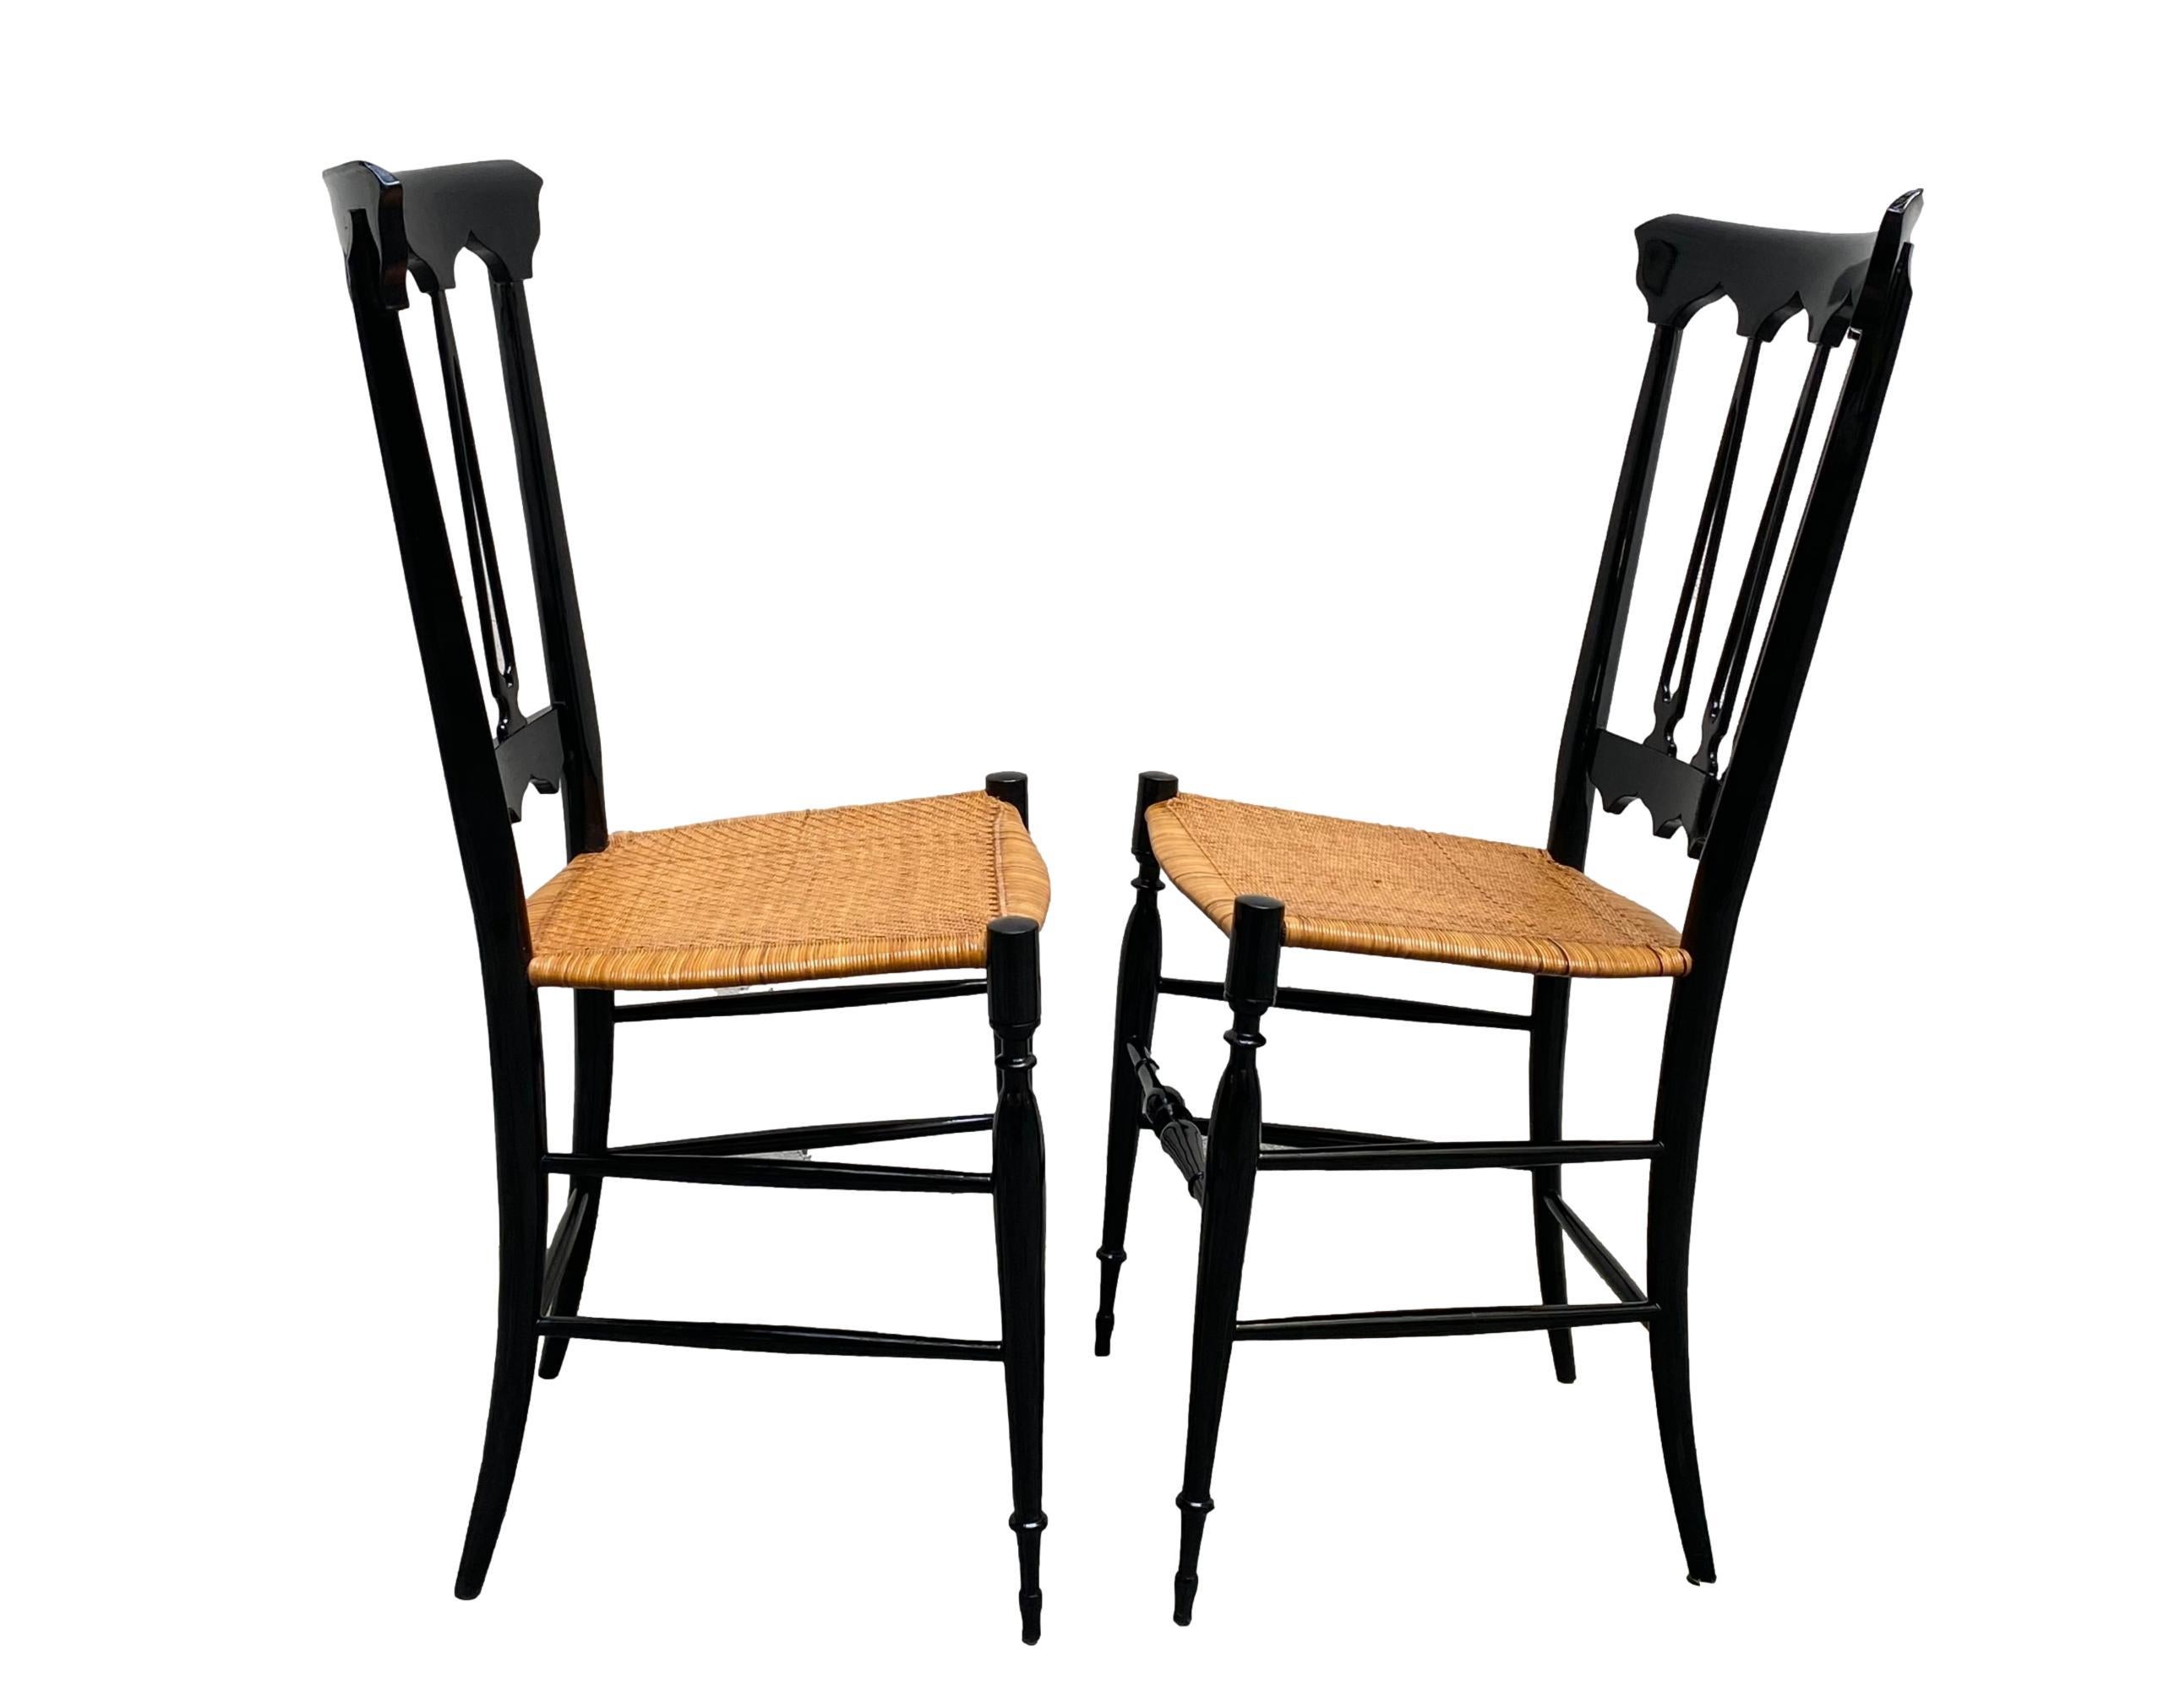 Italian Fratelli Sanguineti Pair of Black Wood and Wicker Chairs, Italy 1950s